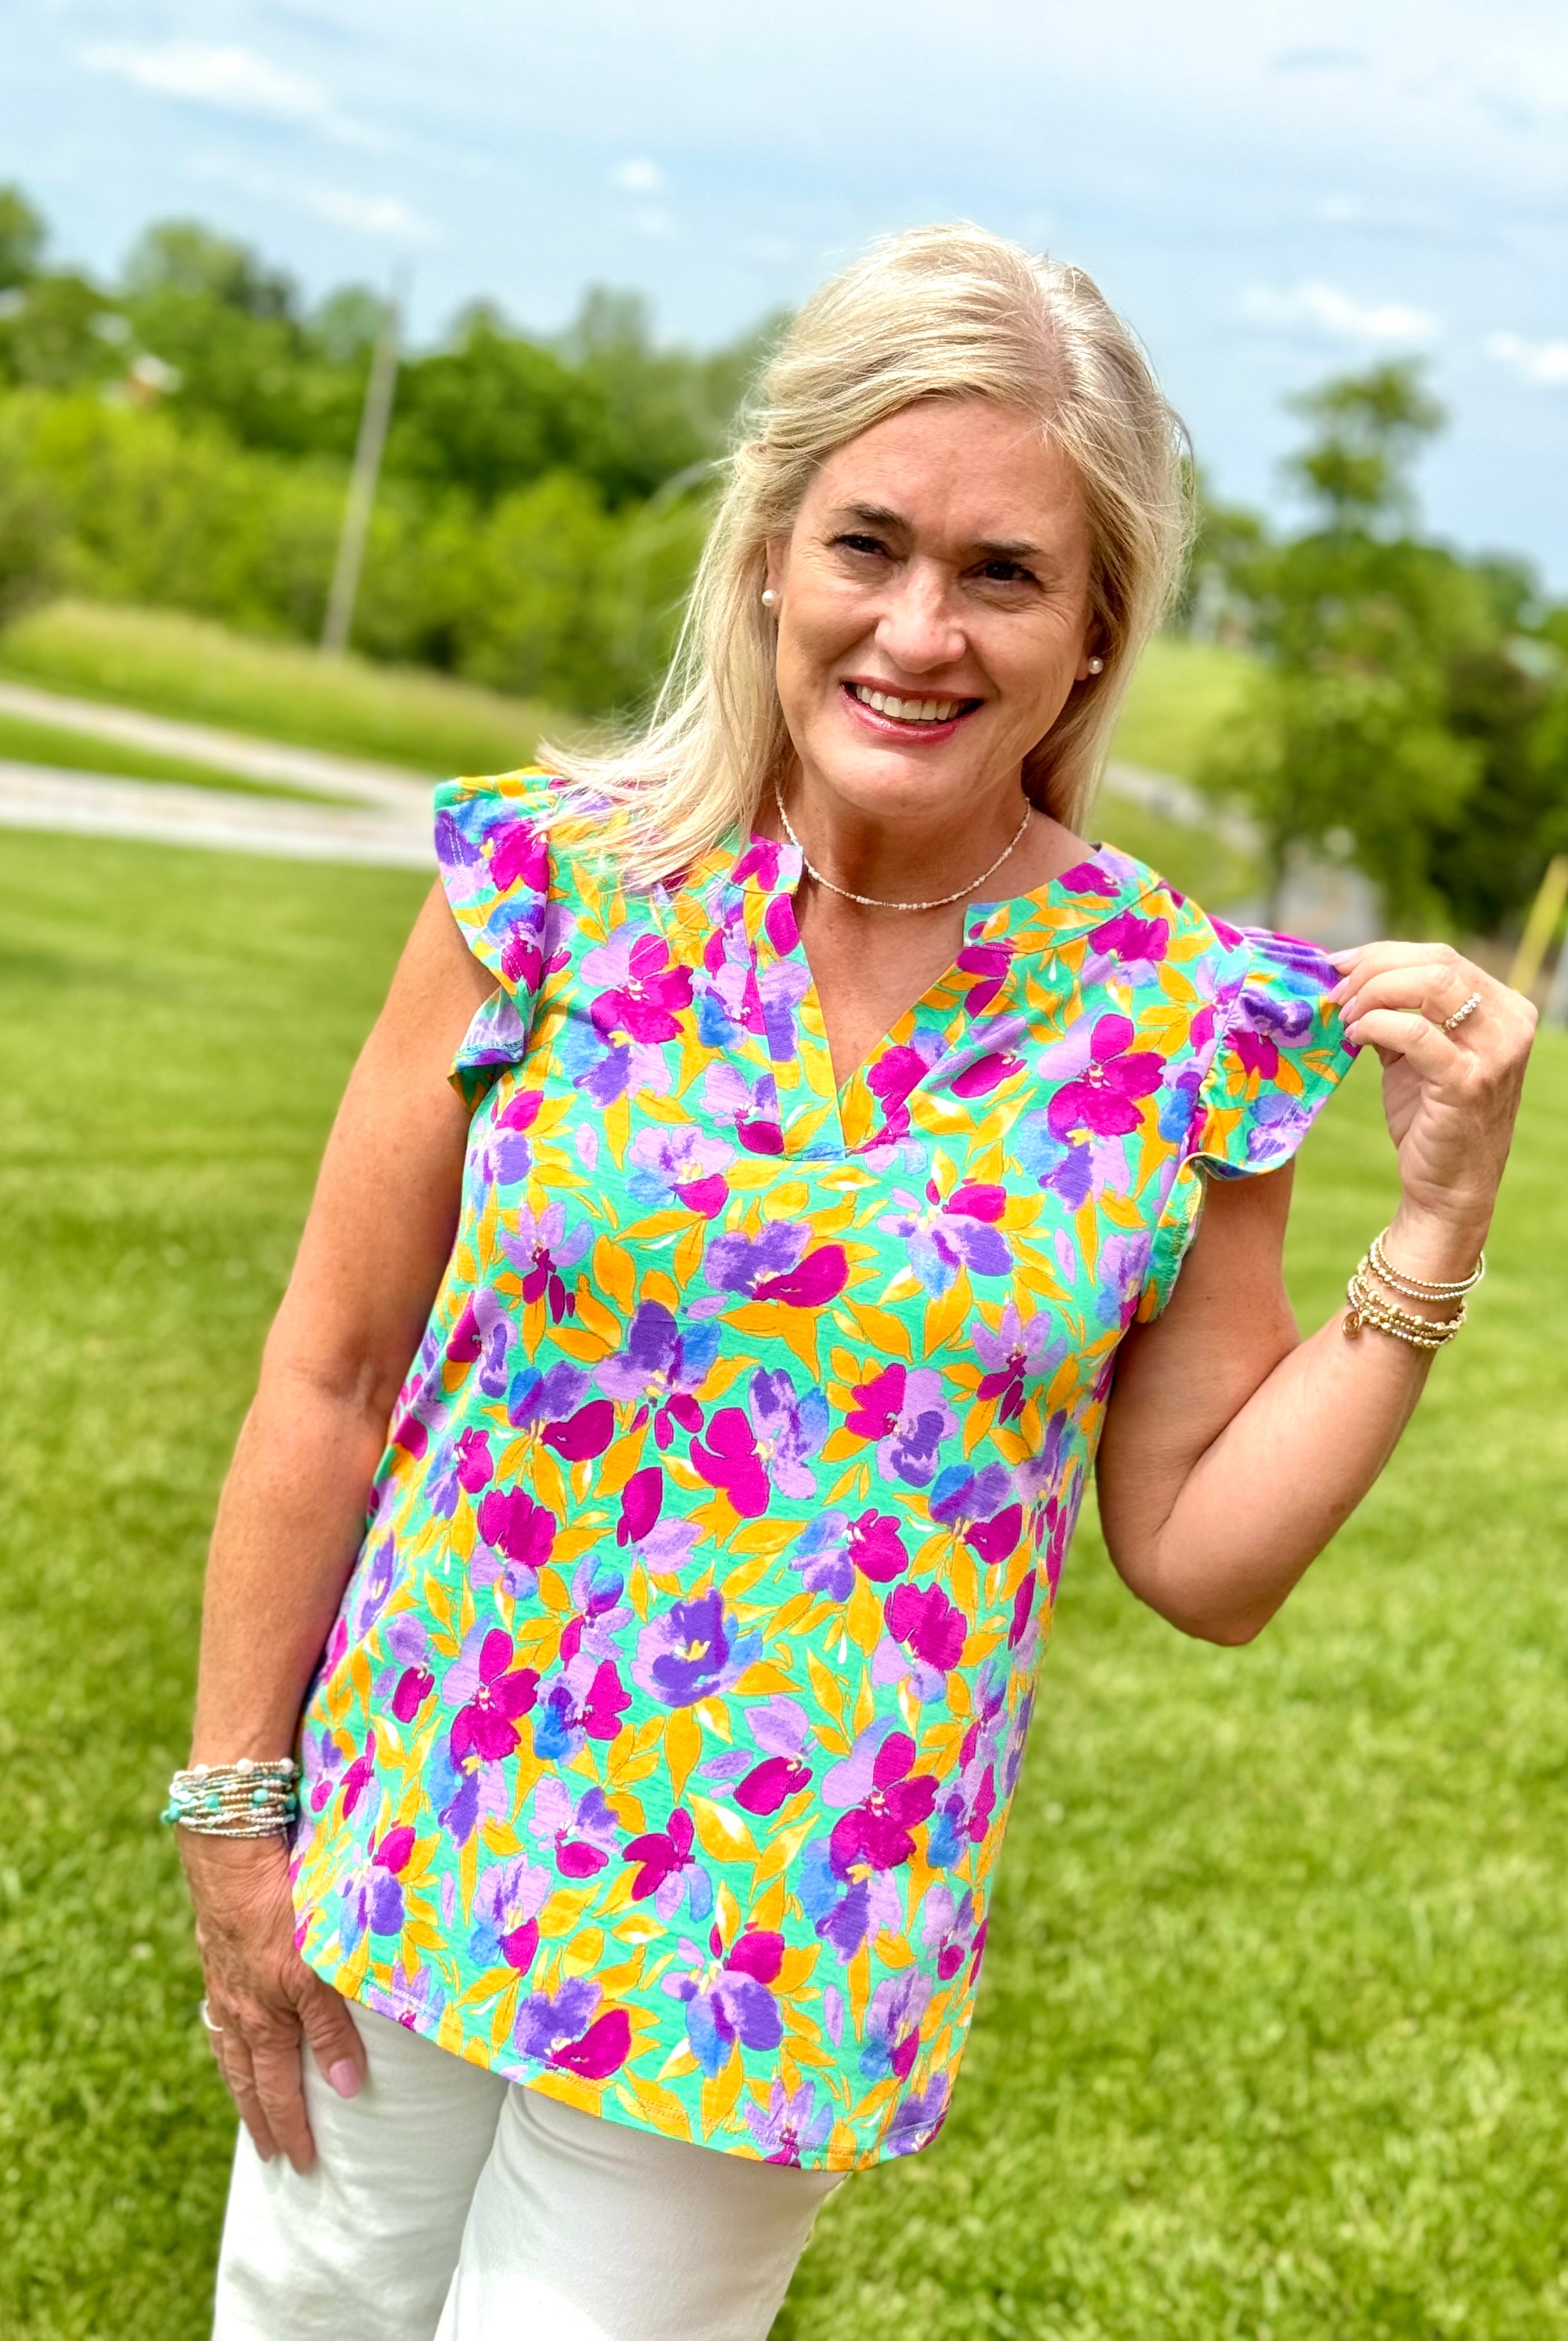 Tropical Splash Short Sleeve Top-100 Short Sleeve Tops-The Lovely Closet-The Lovely Closet, Women's Fashion Boutique in Alexandria, KY